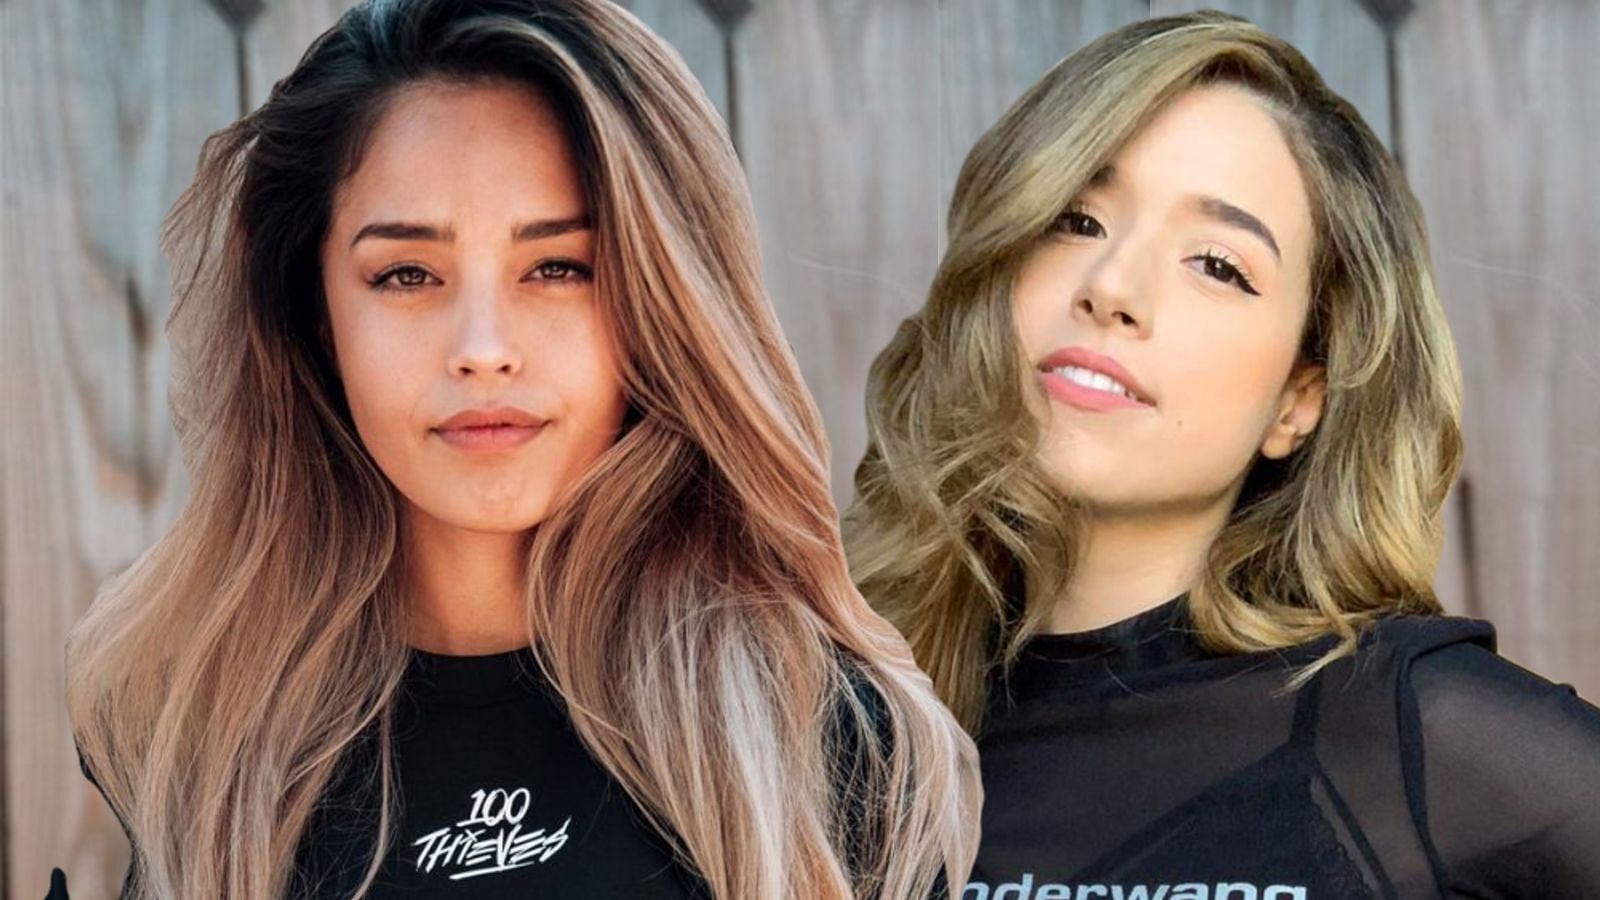 Pokimane, Valkyrae and so many more streamers have been wishing fans a happy new year (Image via Twitch)